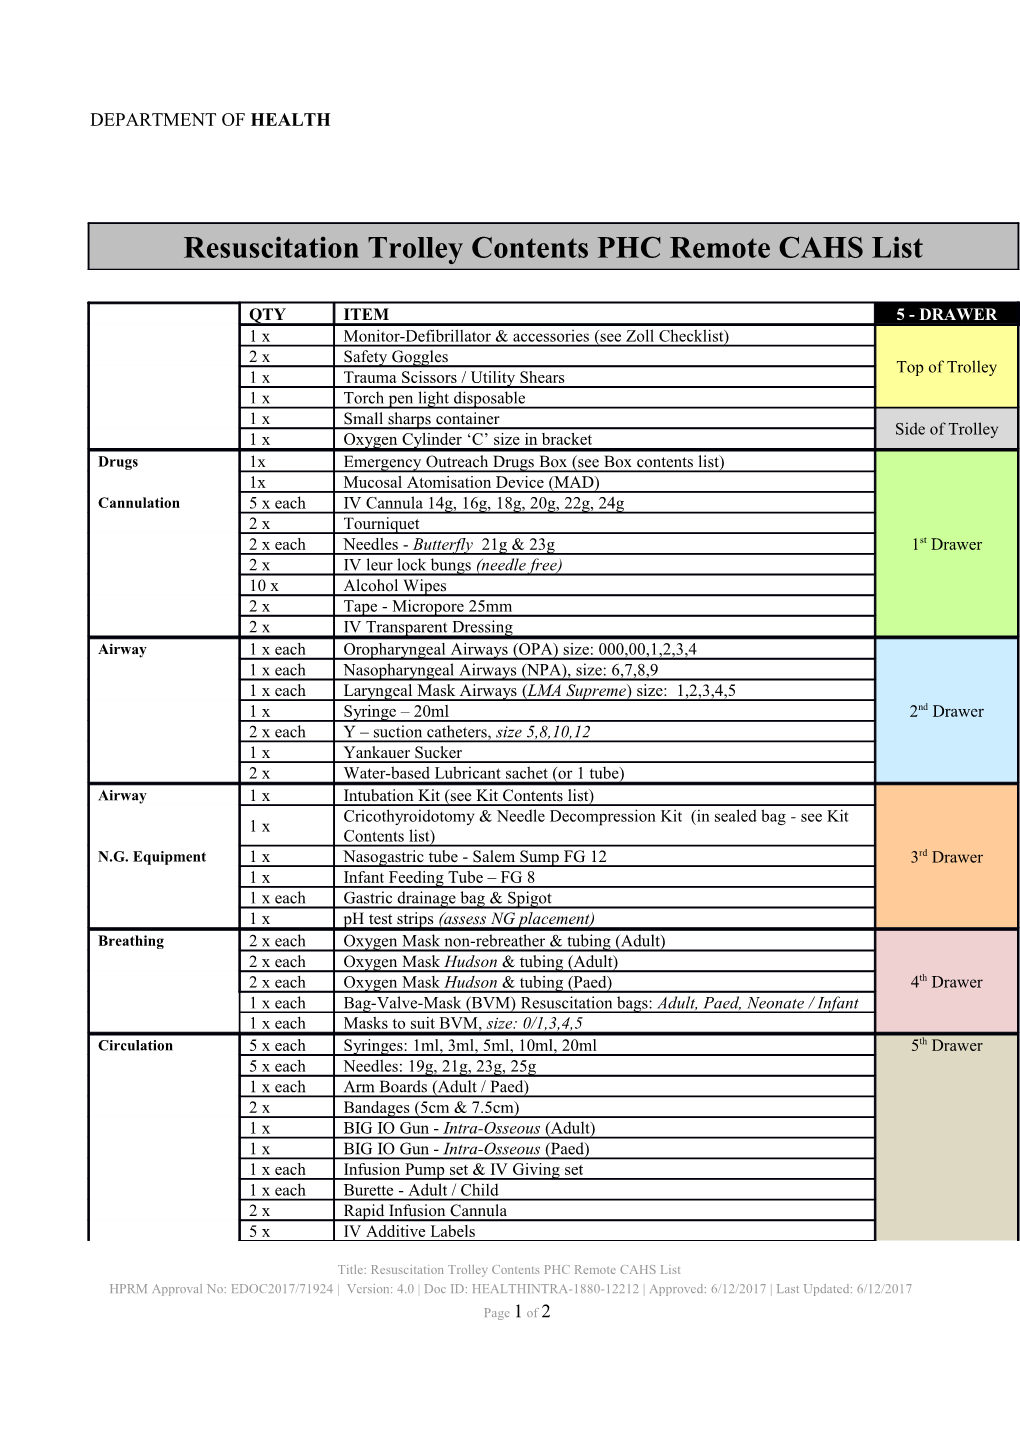 Resuscitation Trolley Contents PHC Remote CAHS List